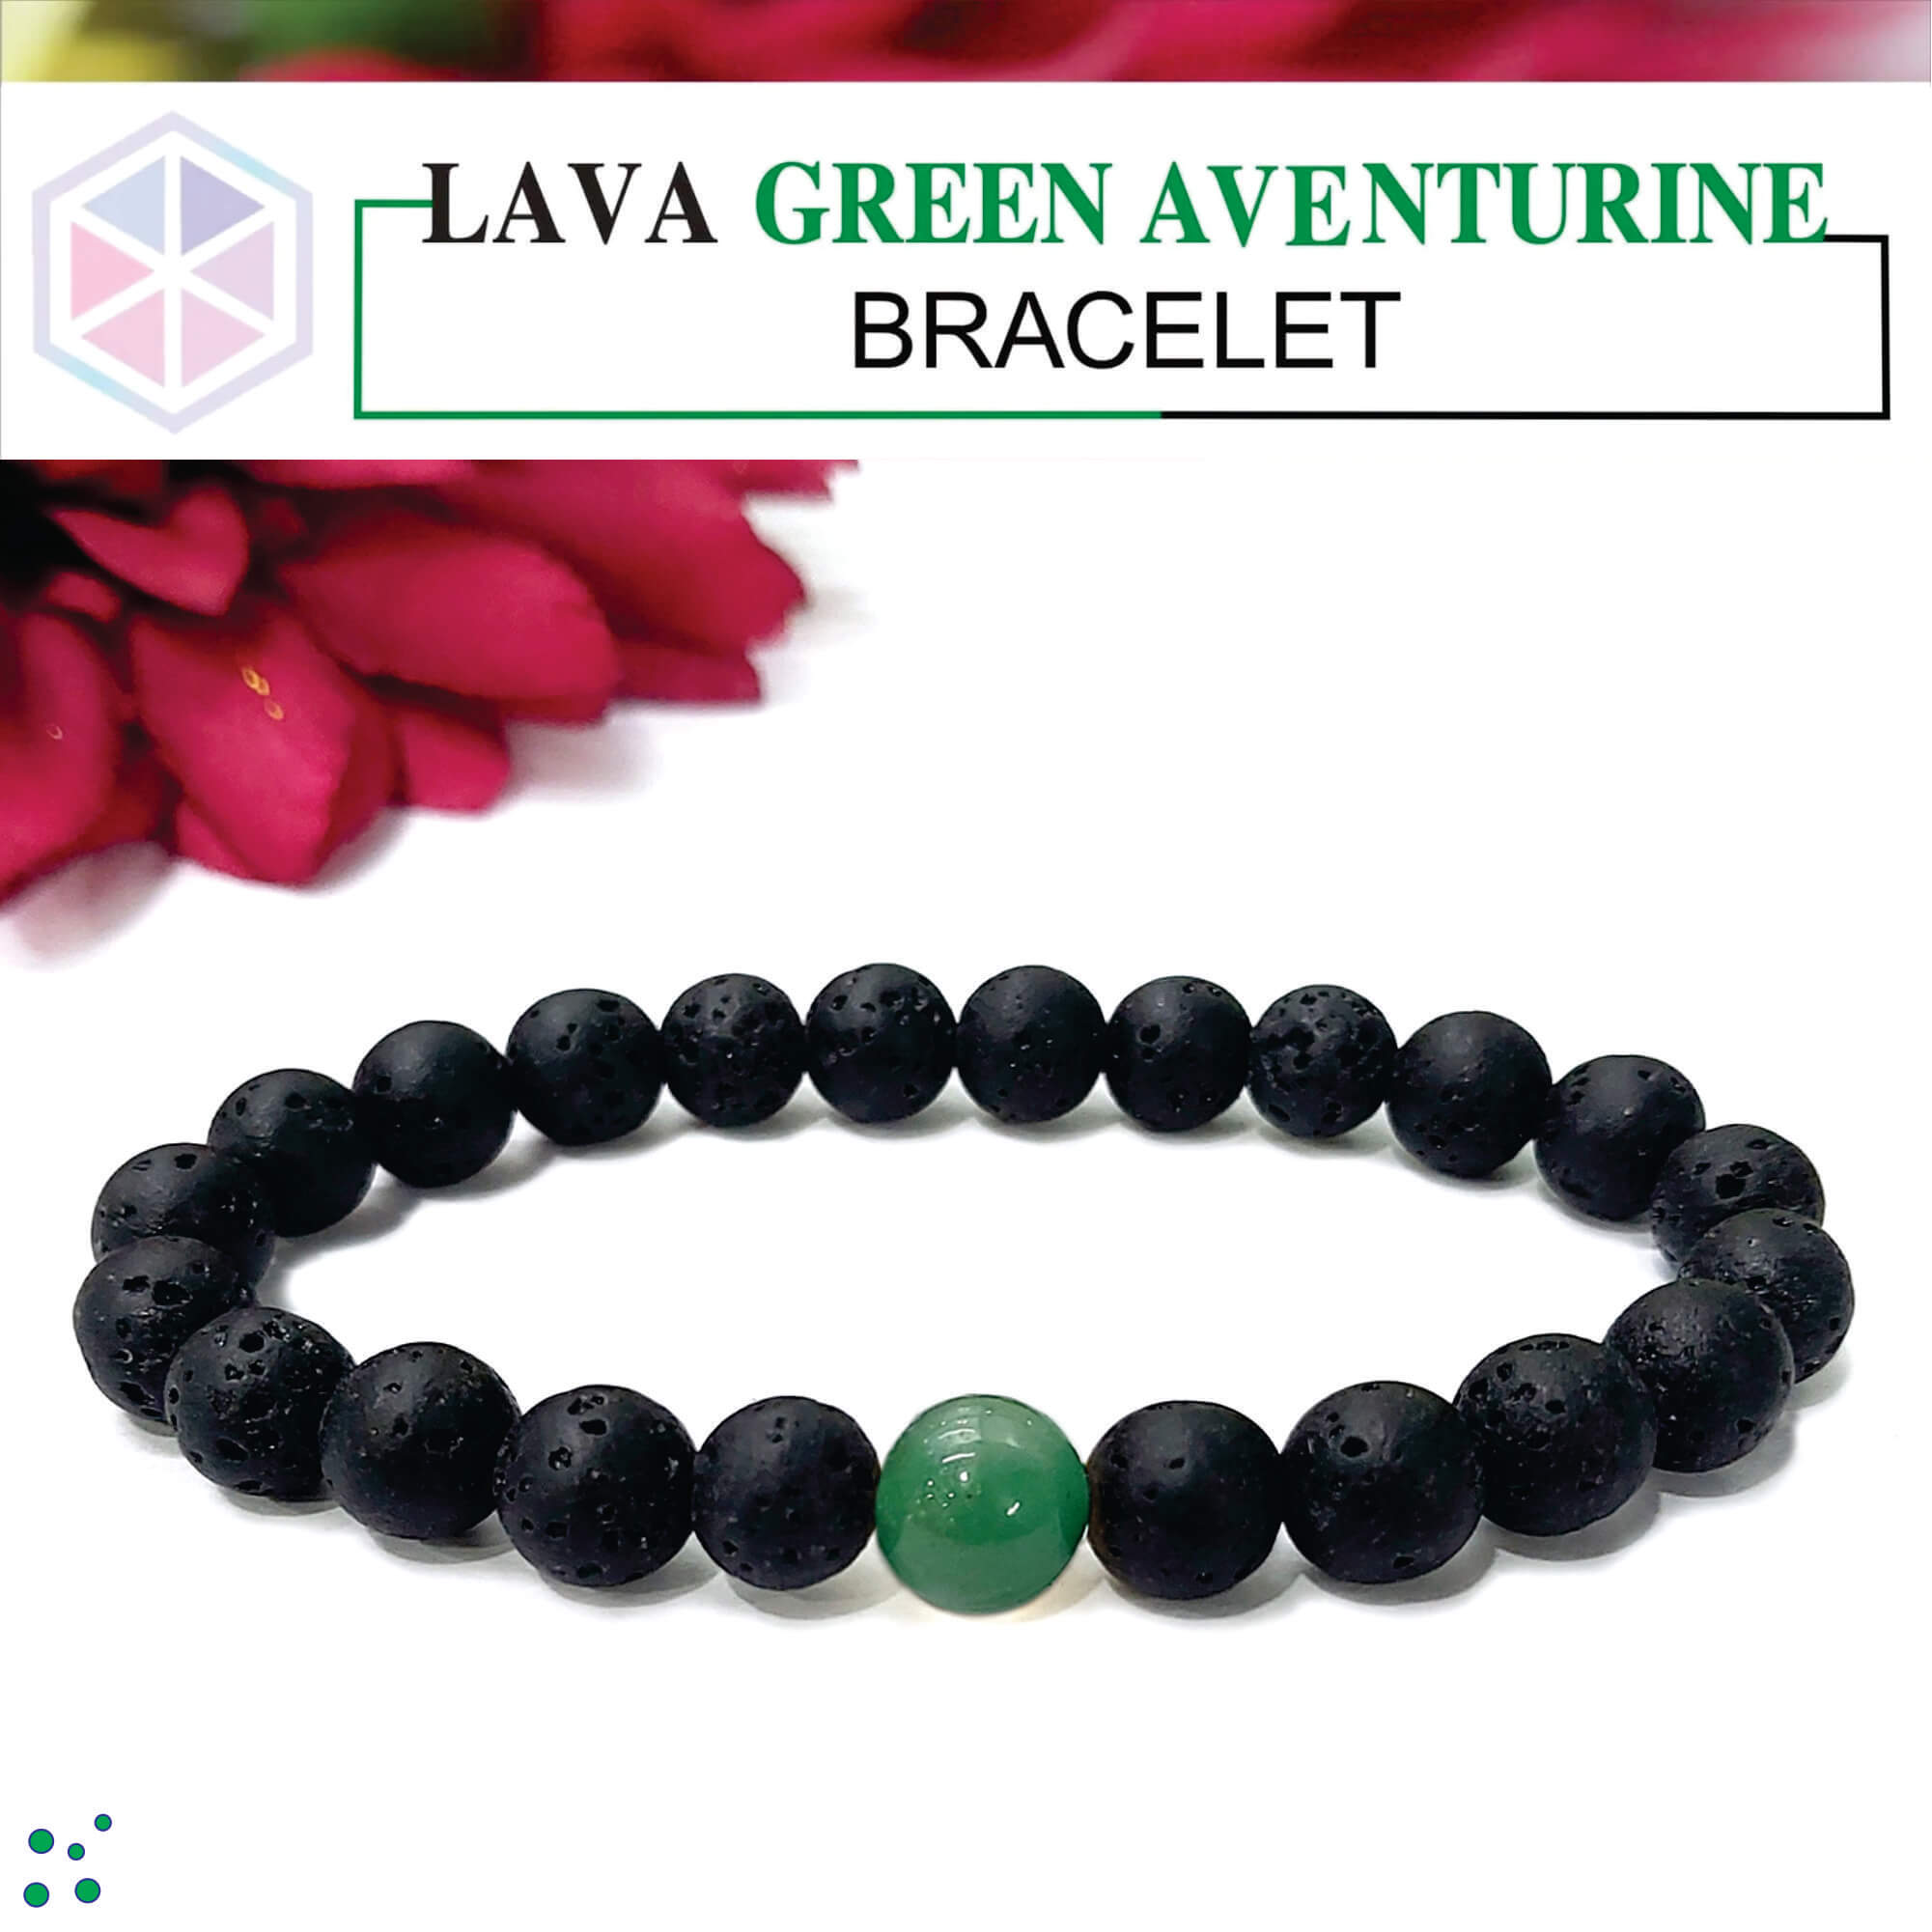 Buy Crystu Natural Certified Green Aventurine Bracelet Diamond Cut Beads  10mm Crystal Stone Bracelet for Reiki Healing and Crystal Healing Stones  (Color : Green) For Unisex Adult at Amazon.in